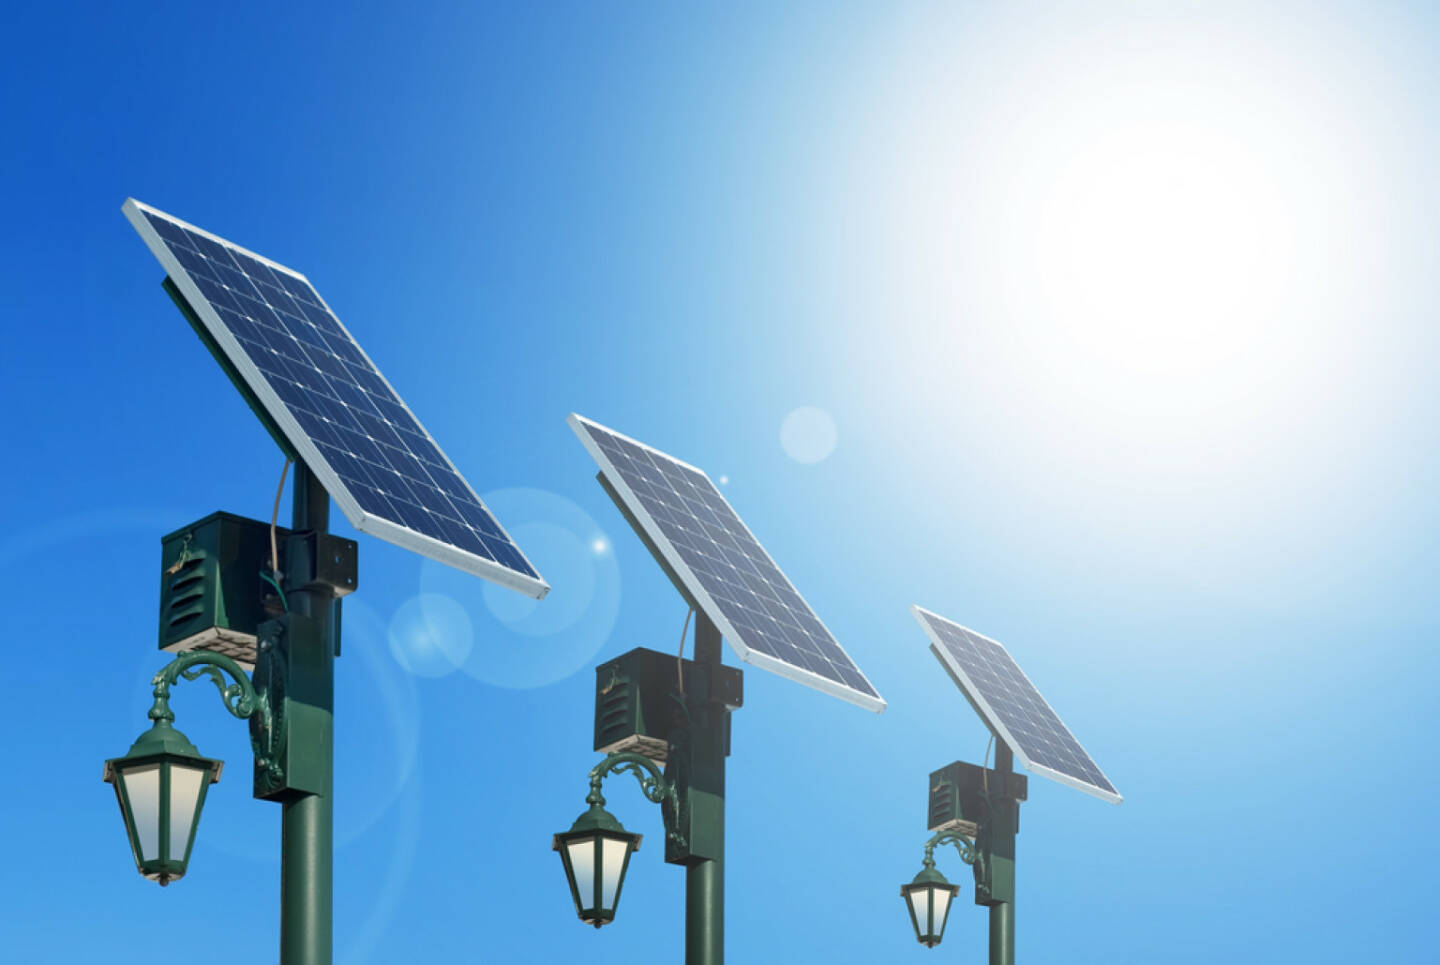 Solar, Solarlampe, http://www.shutterstock.com/de/pic-70419373/stock-photo-solar-photovoltaic-powered-lamp-posts-on-the-blue-skies-with-sun.html, 